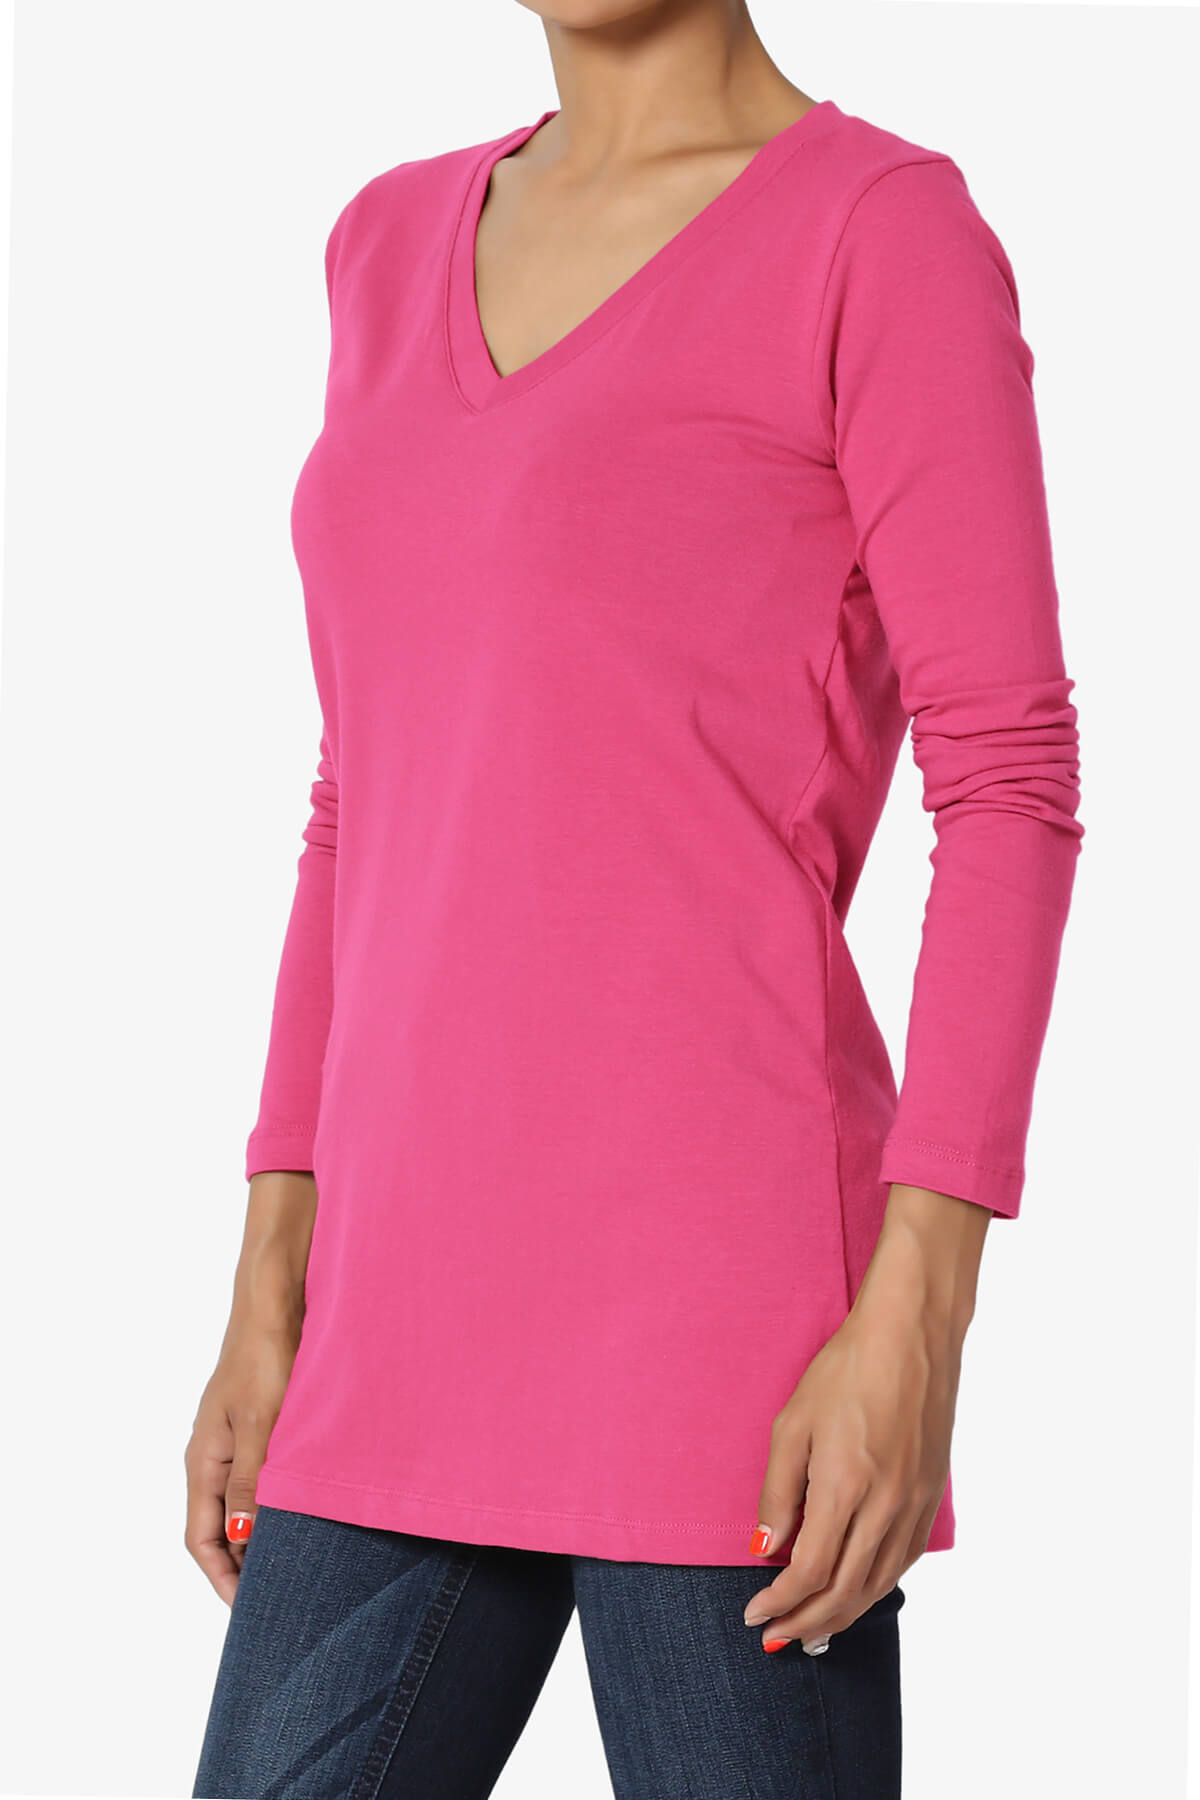 Lasso Cotton V-Neck Long Sleeve Tee HOT PINK_3